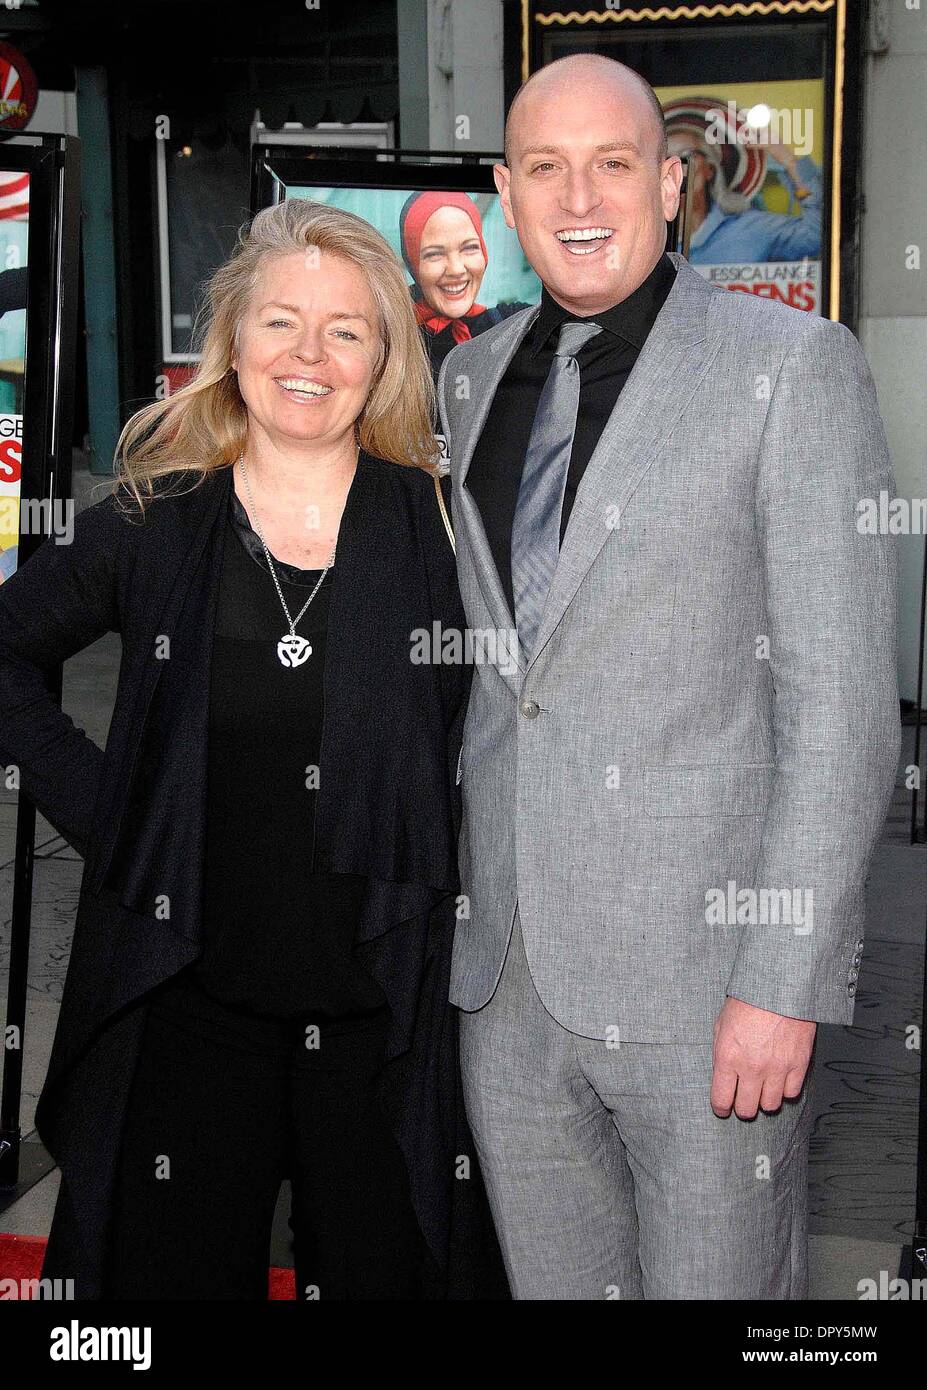 Patricia Rozema Michael Sucsyduring The Premiere Of The New Movie